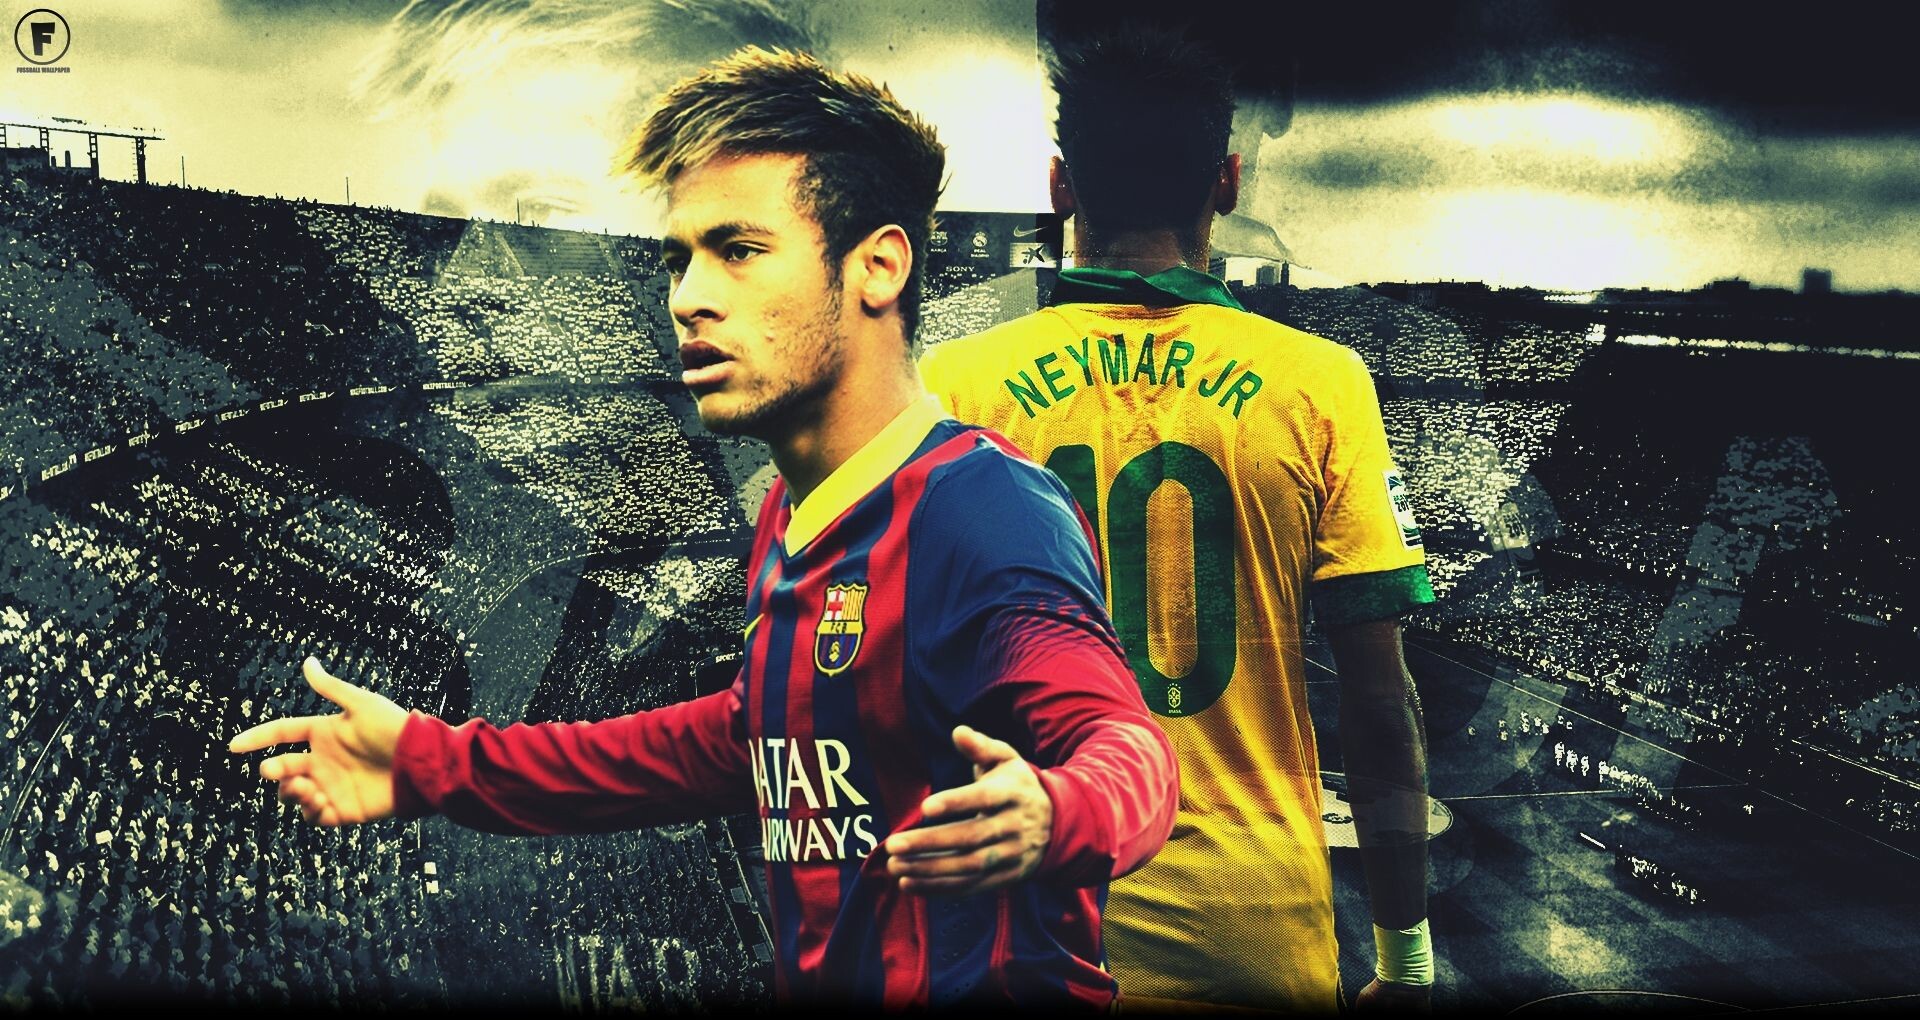 GOAT Neymar 2021 Wallpaper HD Sports 4K Wallpapers Images and Background   Wallpapers Den